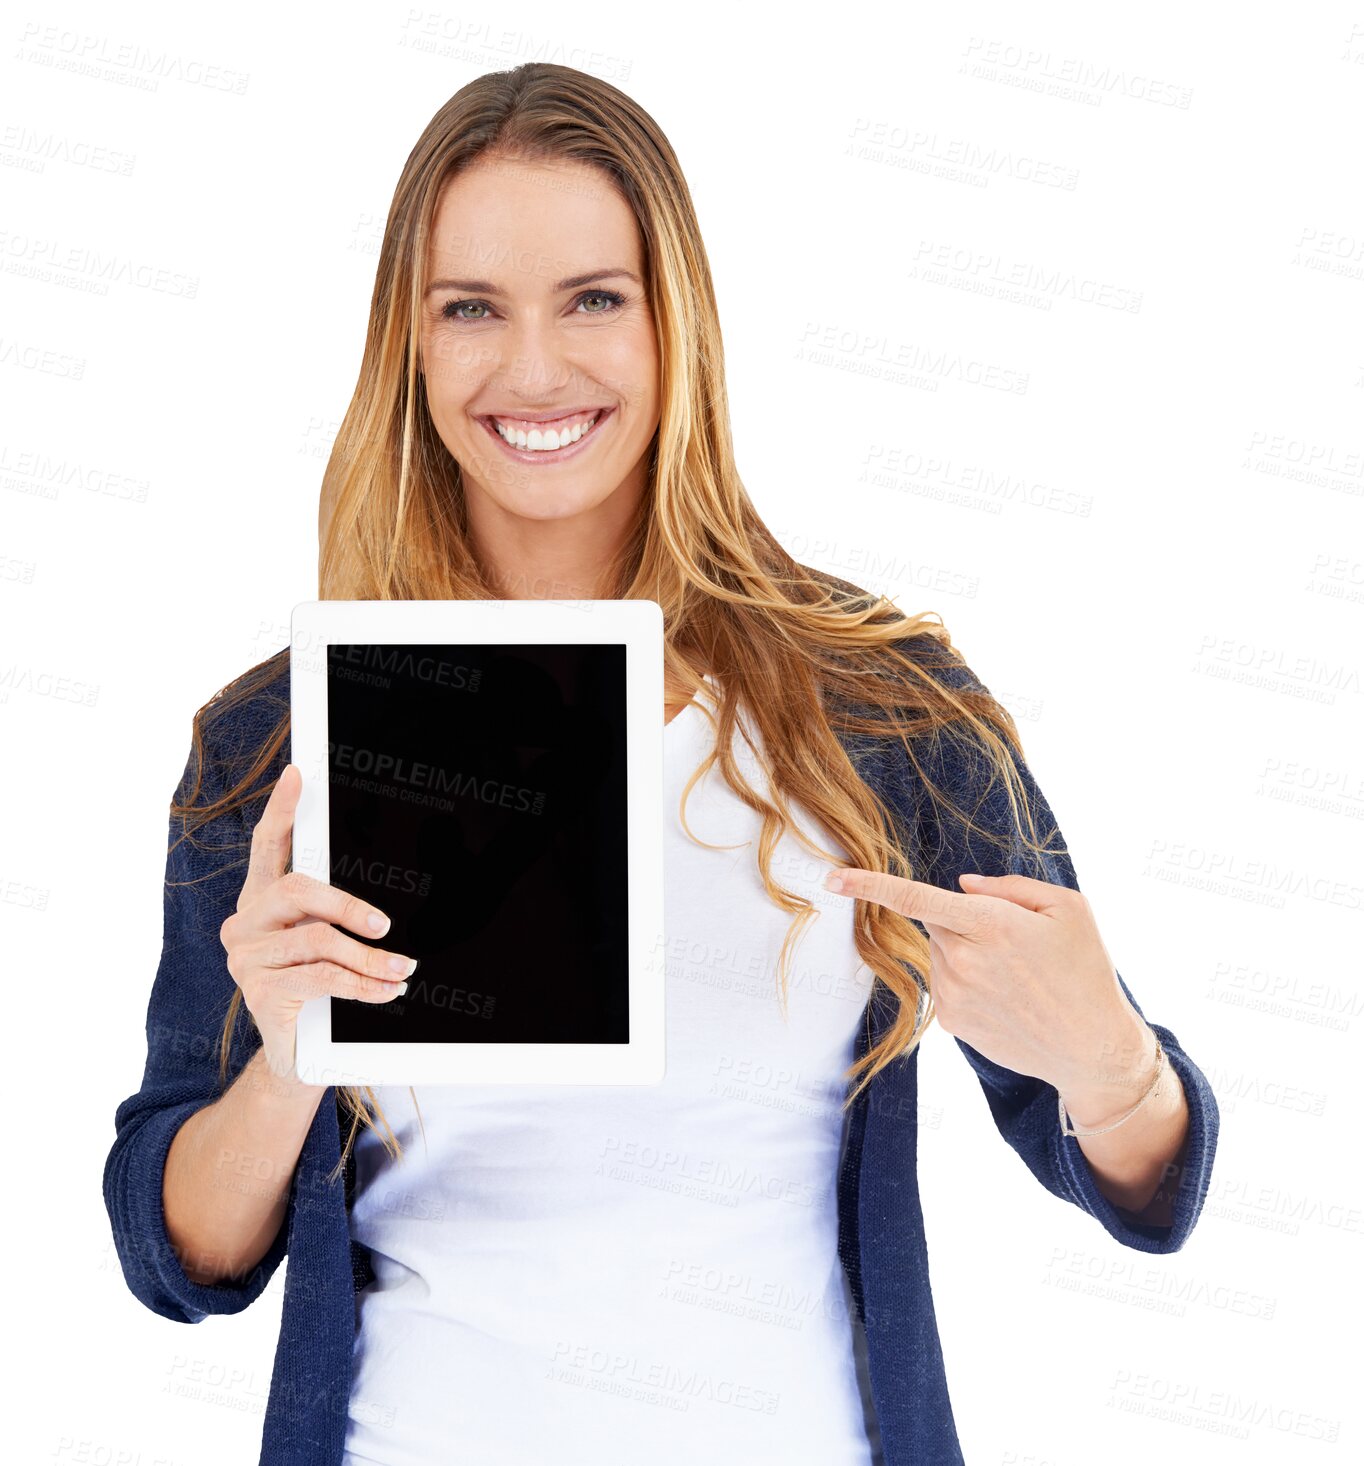 Buy stock photo Portrait of happy woman, tablet and pointing isolated on transparent png background for website promo. Model, mockup and digital app for online technology, application or announcement on screen